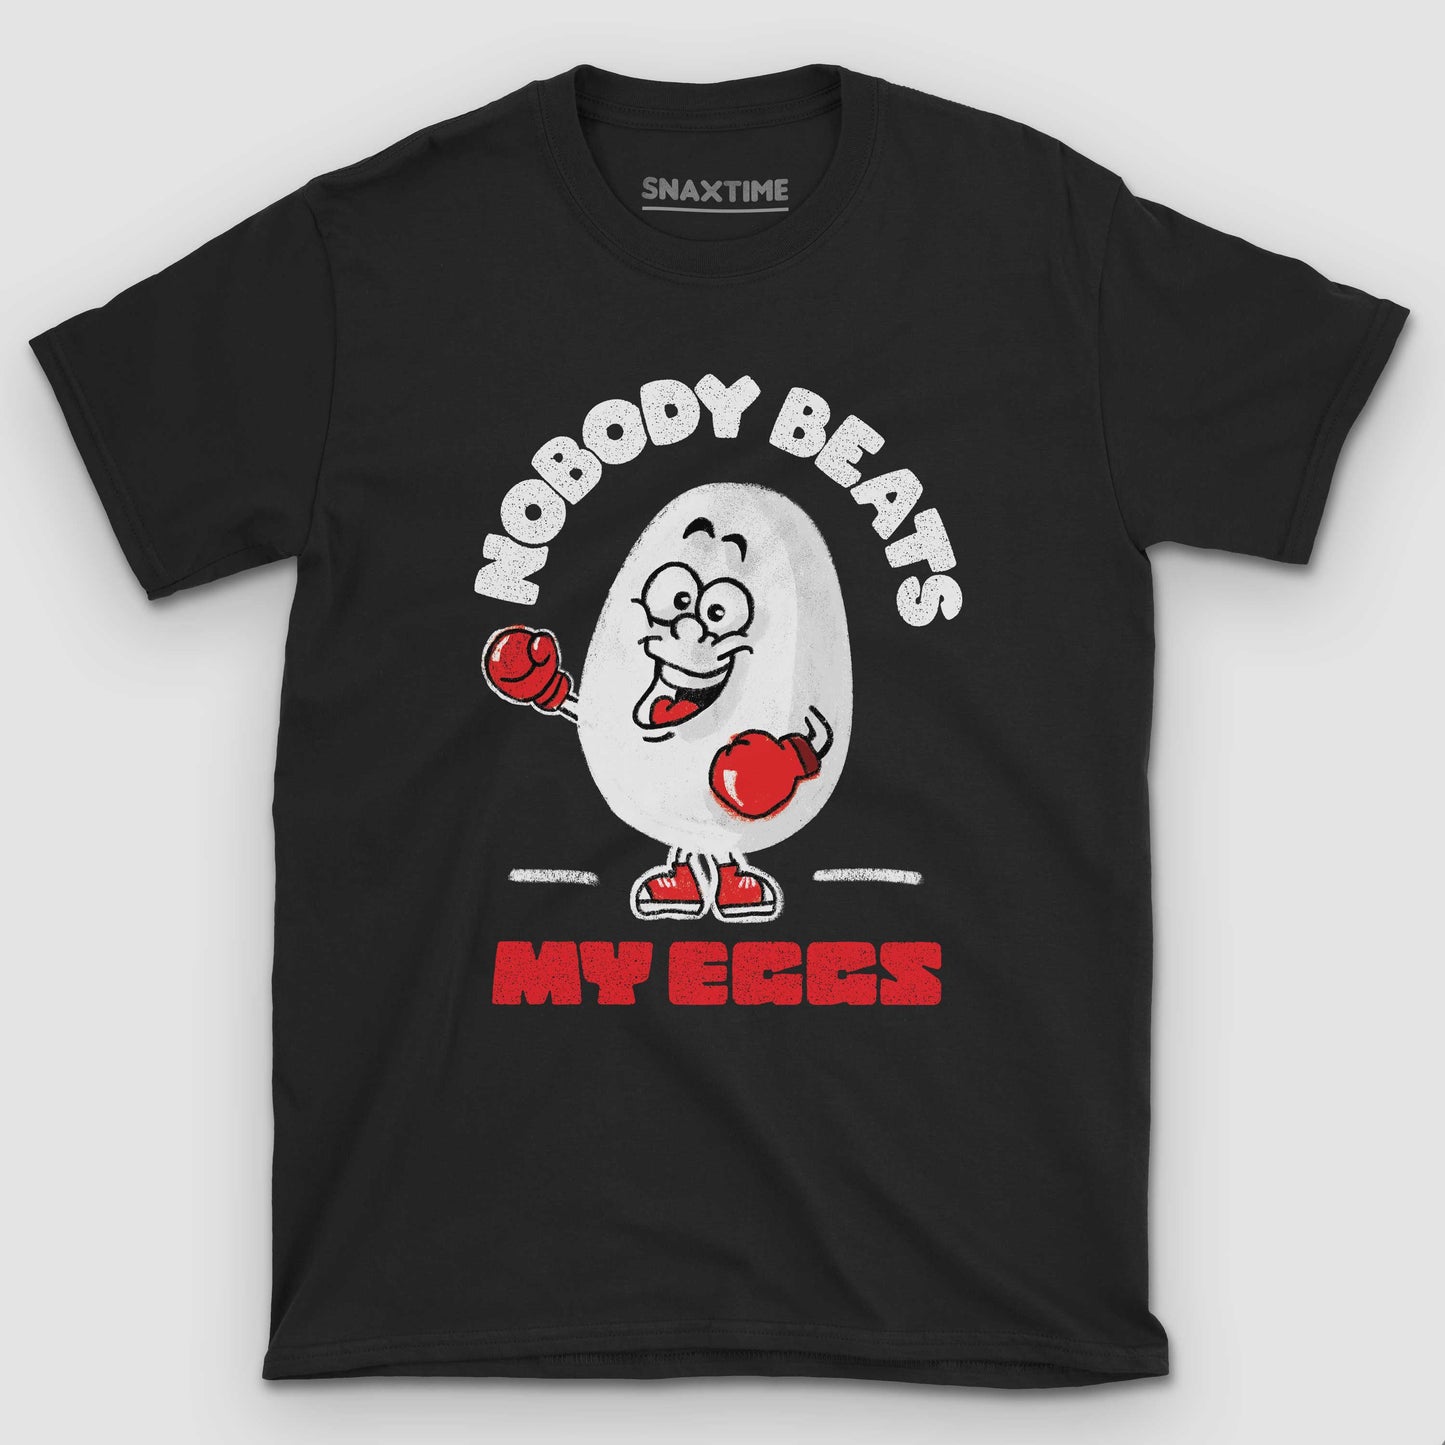  Nobody Beats My Eggs Graphic T-Shirt by Snaxtime